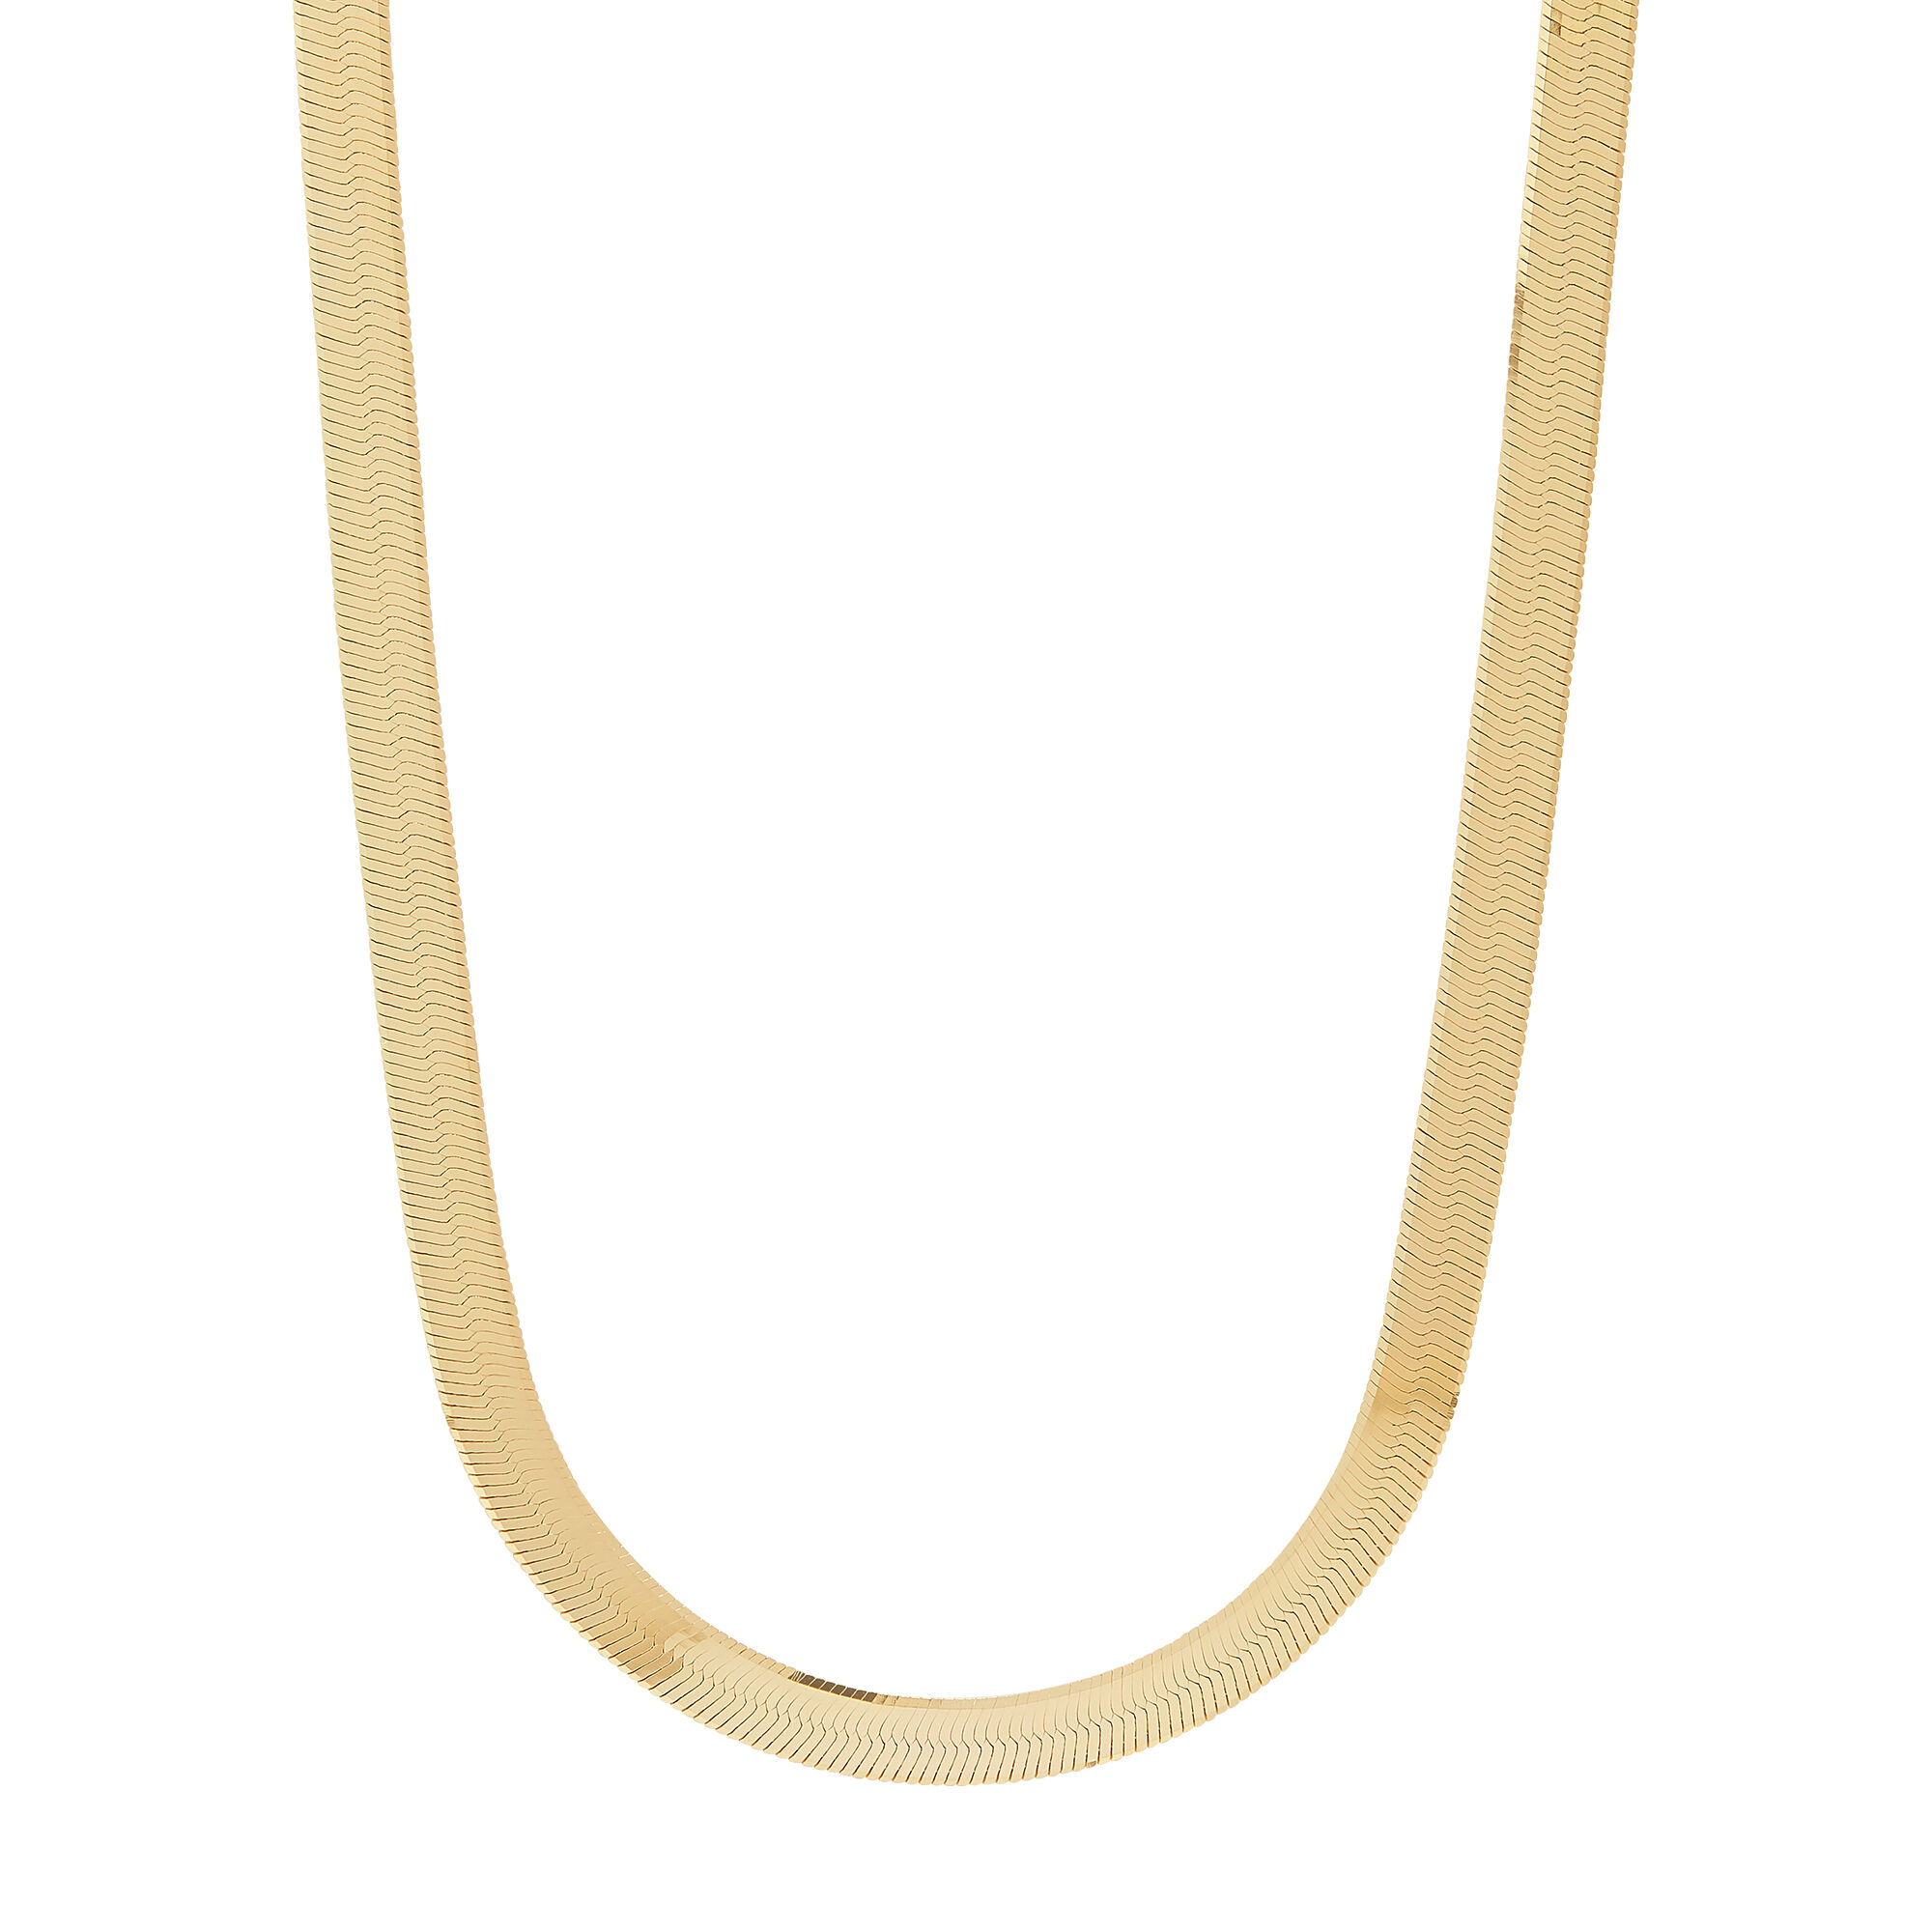 Amazon.com: Jewelry Affairs 14k Yellow Real Solid Gold Imperial Herringbone  Chain Necklace, 6.0mm (7 Inches): Clothing, Shoes & Jewelry